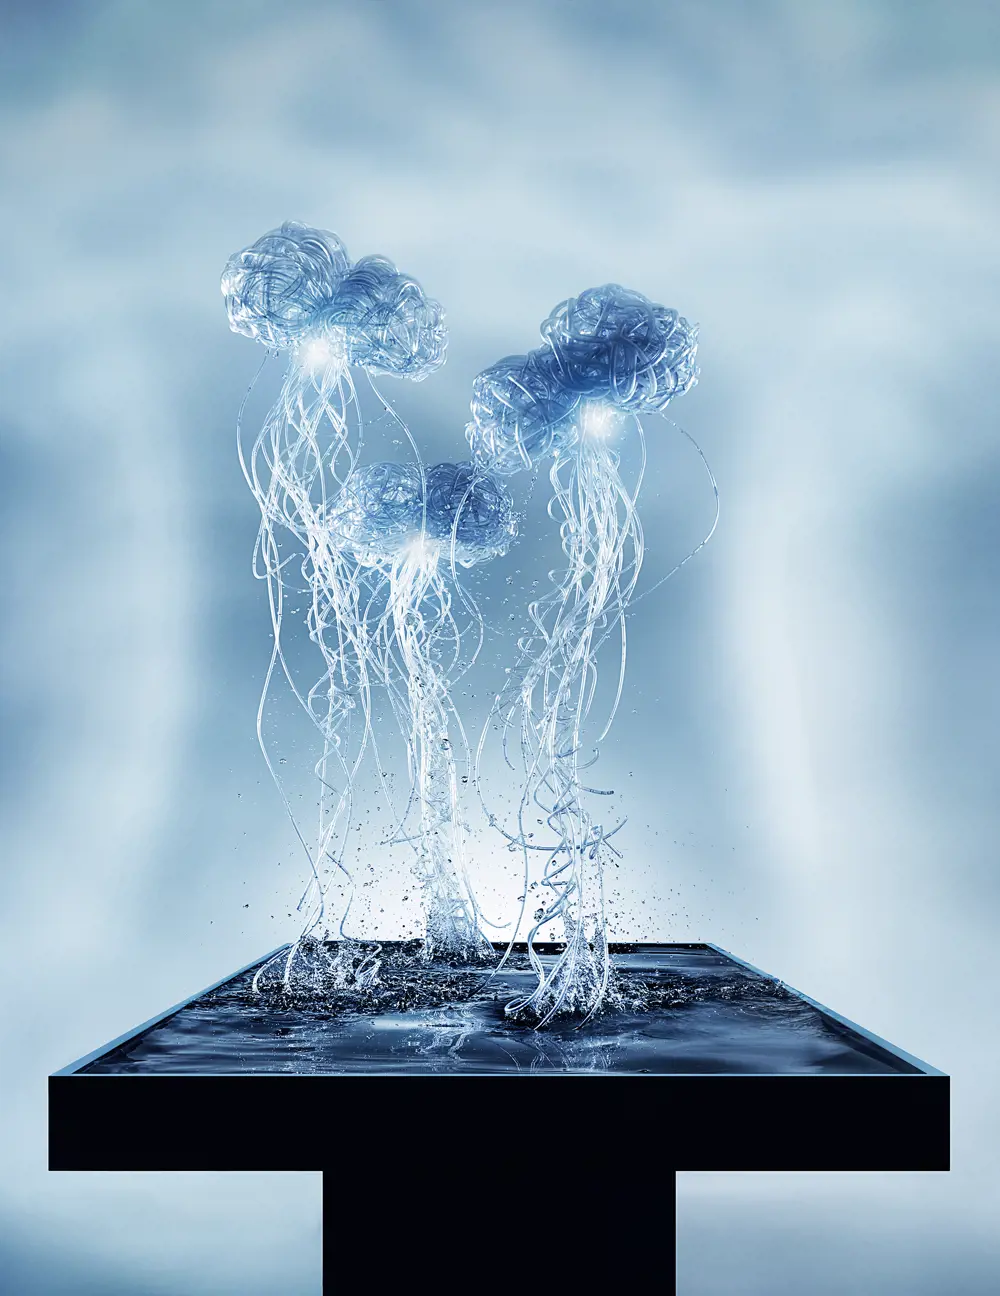 Three jellyfish shapes, created from clear plastic tubing, rise out of a black table filled with water, creating splashes